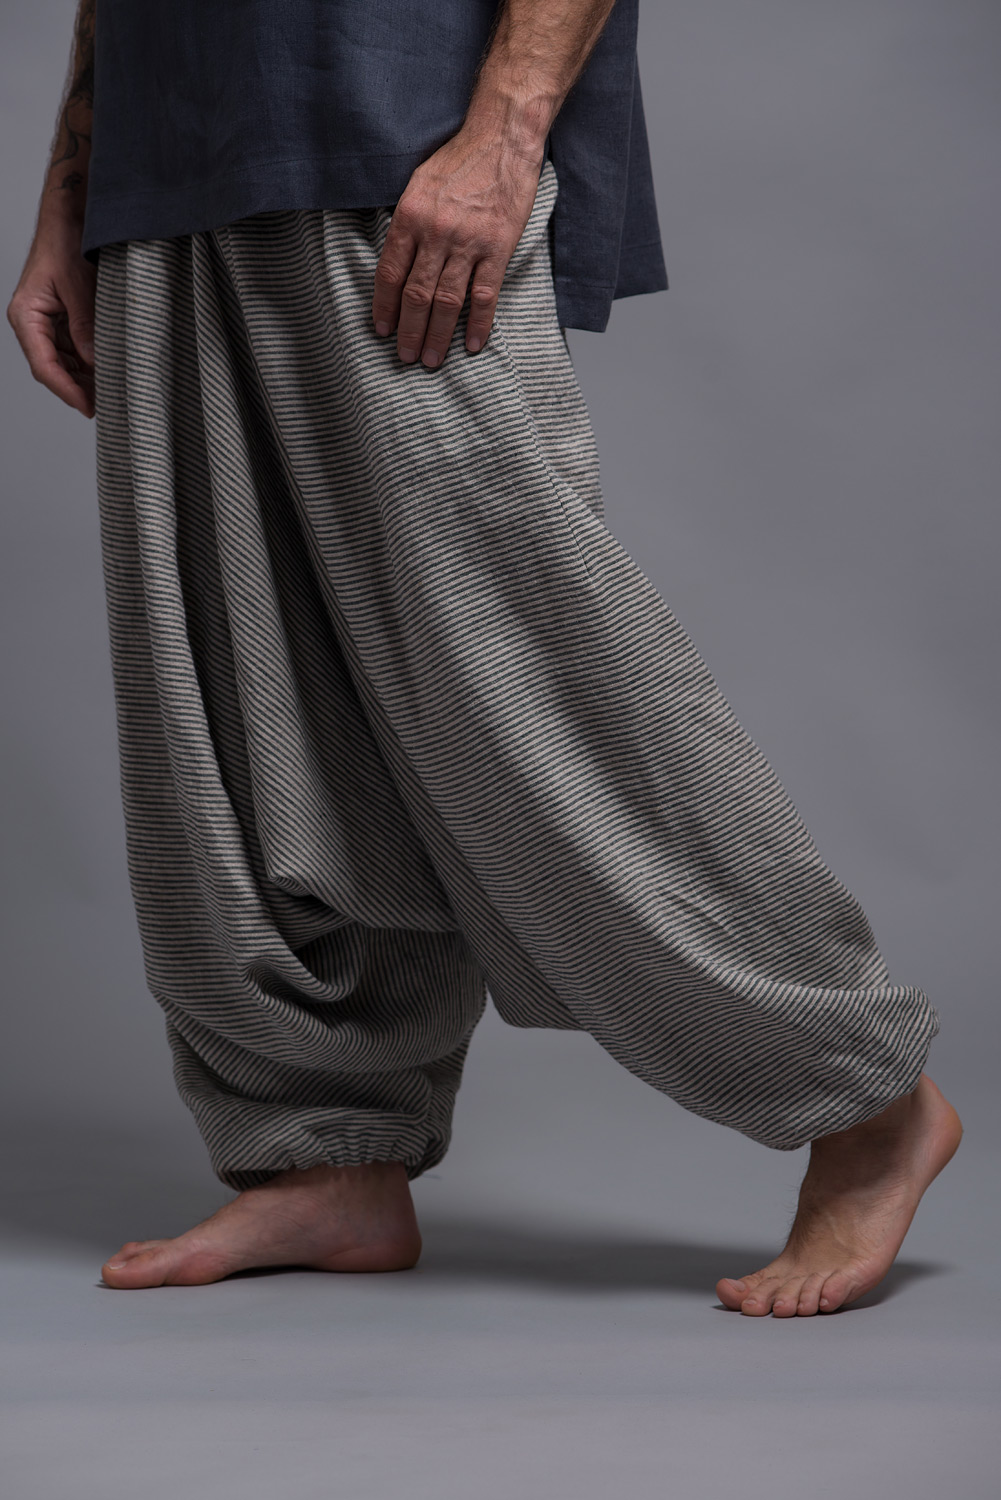 Men's Harem Pants Pack of 2| Cream & Grey Stripes | Fits Waist Size 28 to  36 inches at Rs 999.00 | Men Pyjamas | ID: 2852637837688